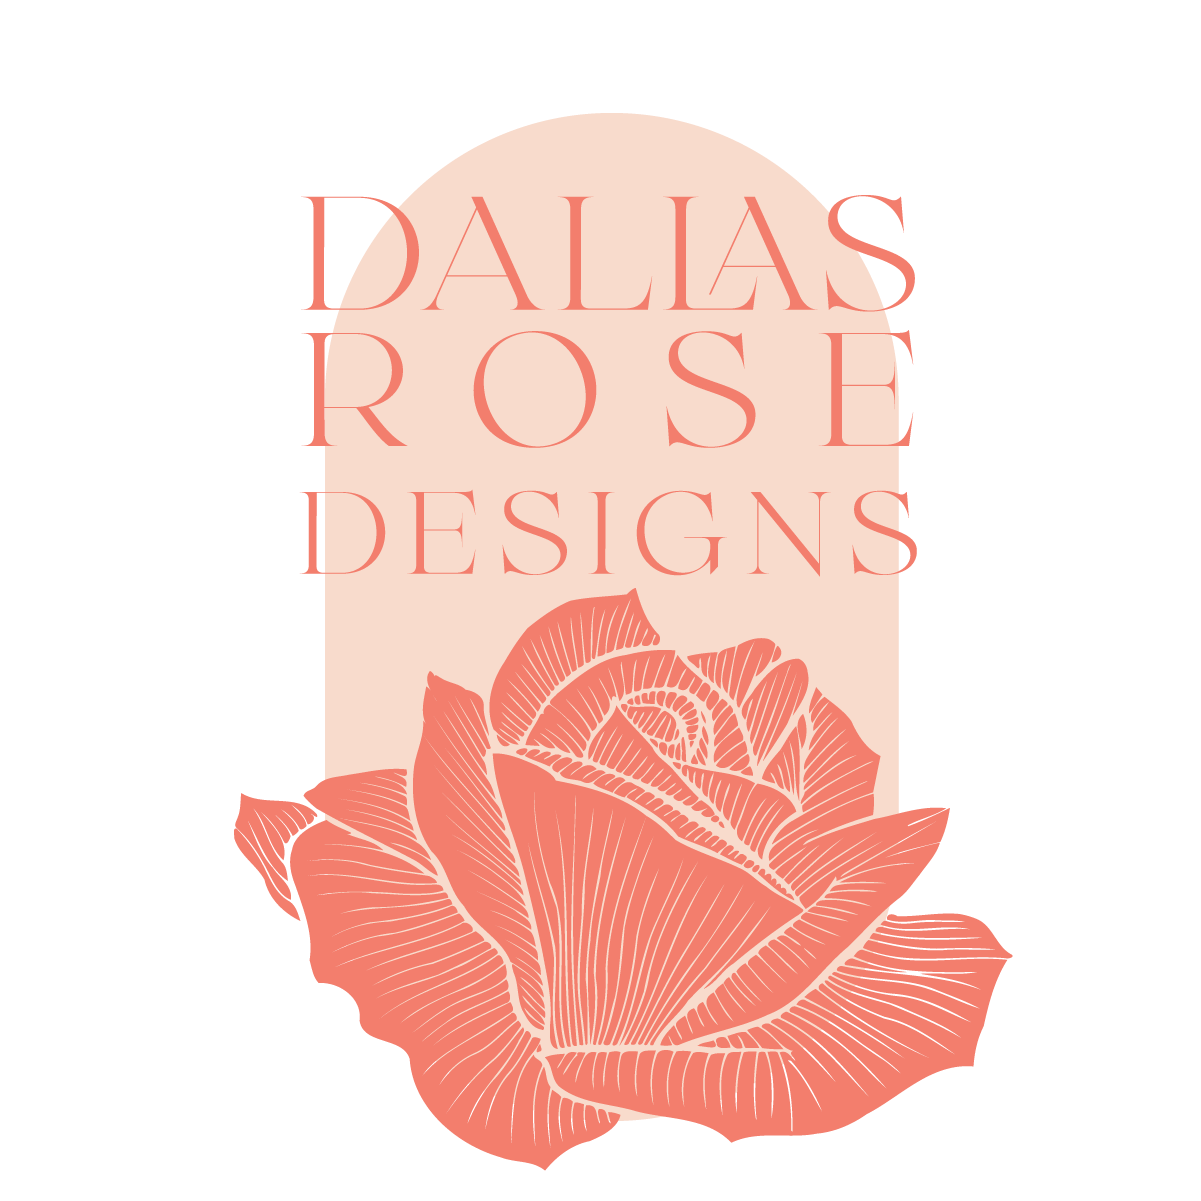 A logo for dallas rose designs with a pink rose